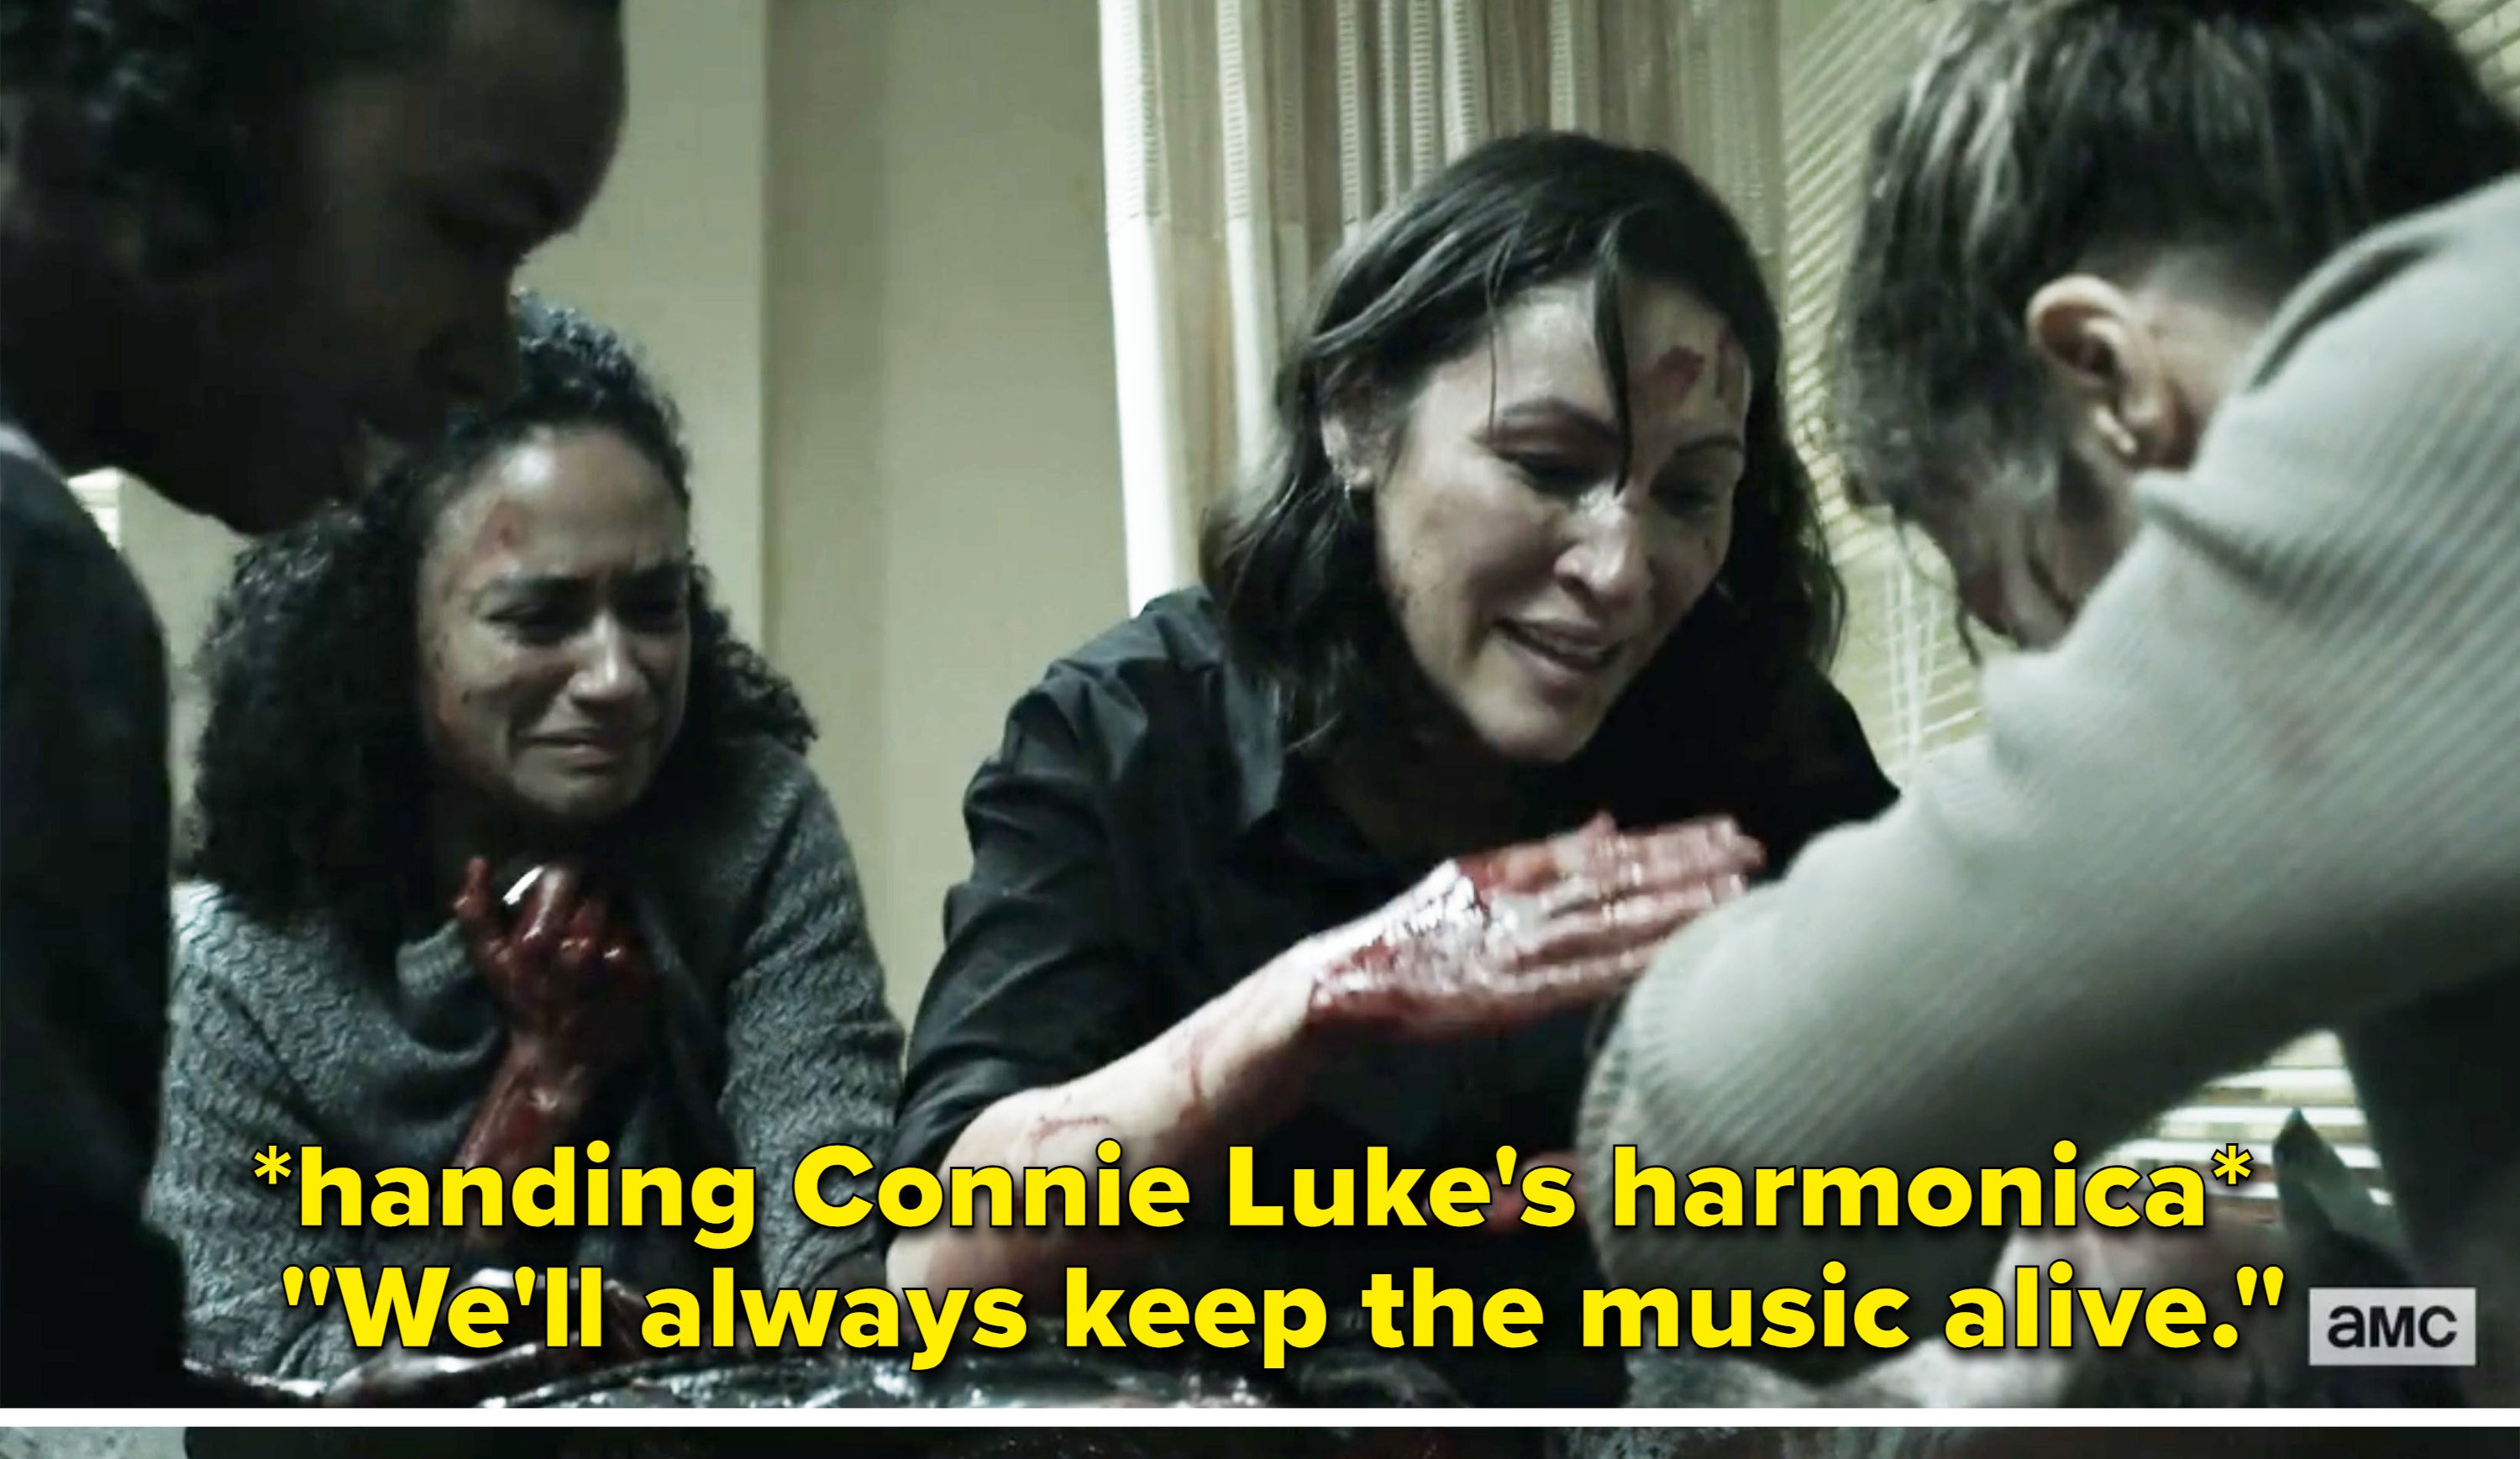 Luke is bleeding out and Yumiko hands Connie Luke&#x27;s harmonica and says &quot;We&#x27;ll always keep the music alive&quot;